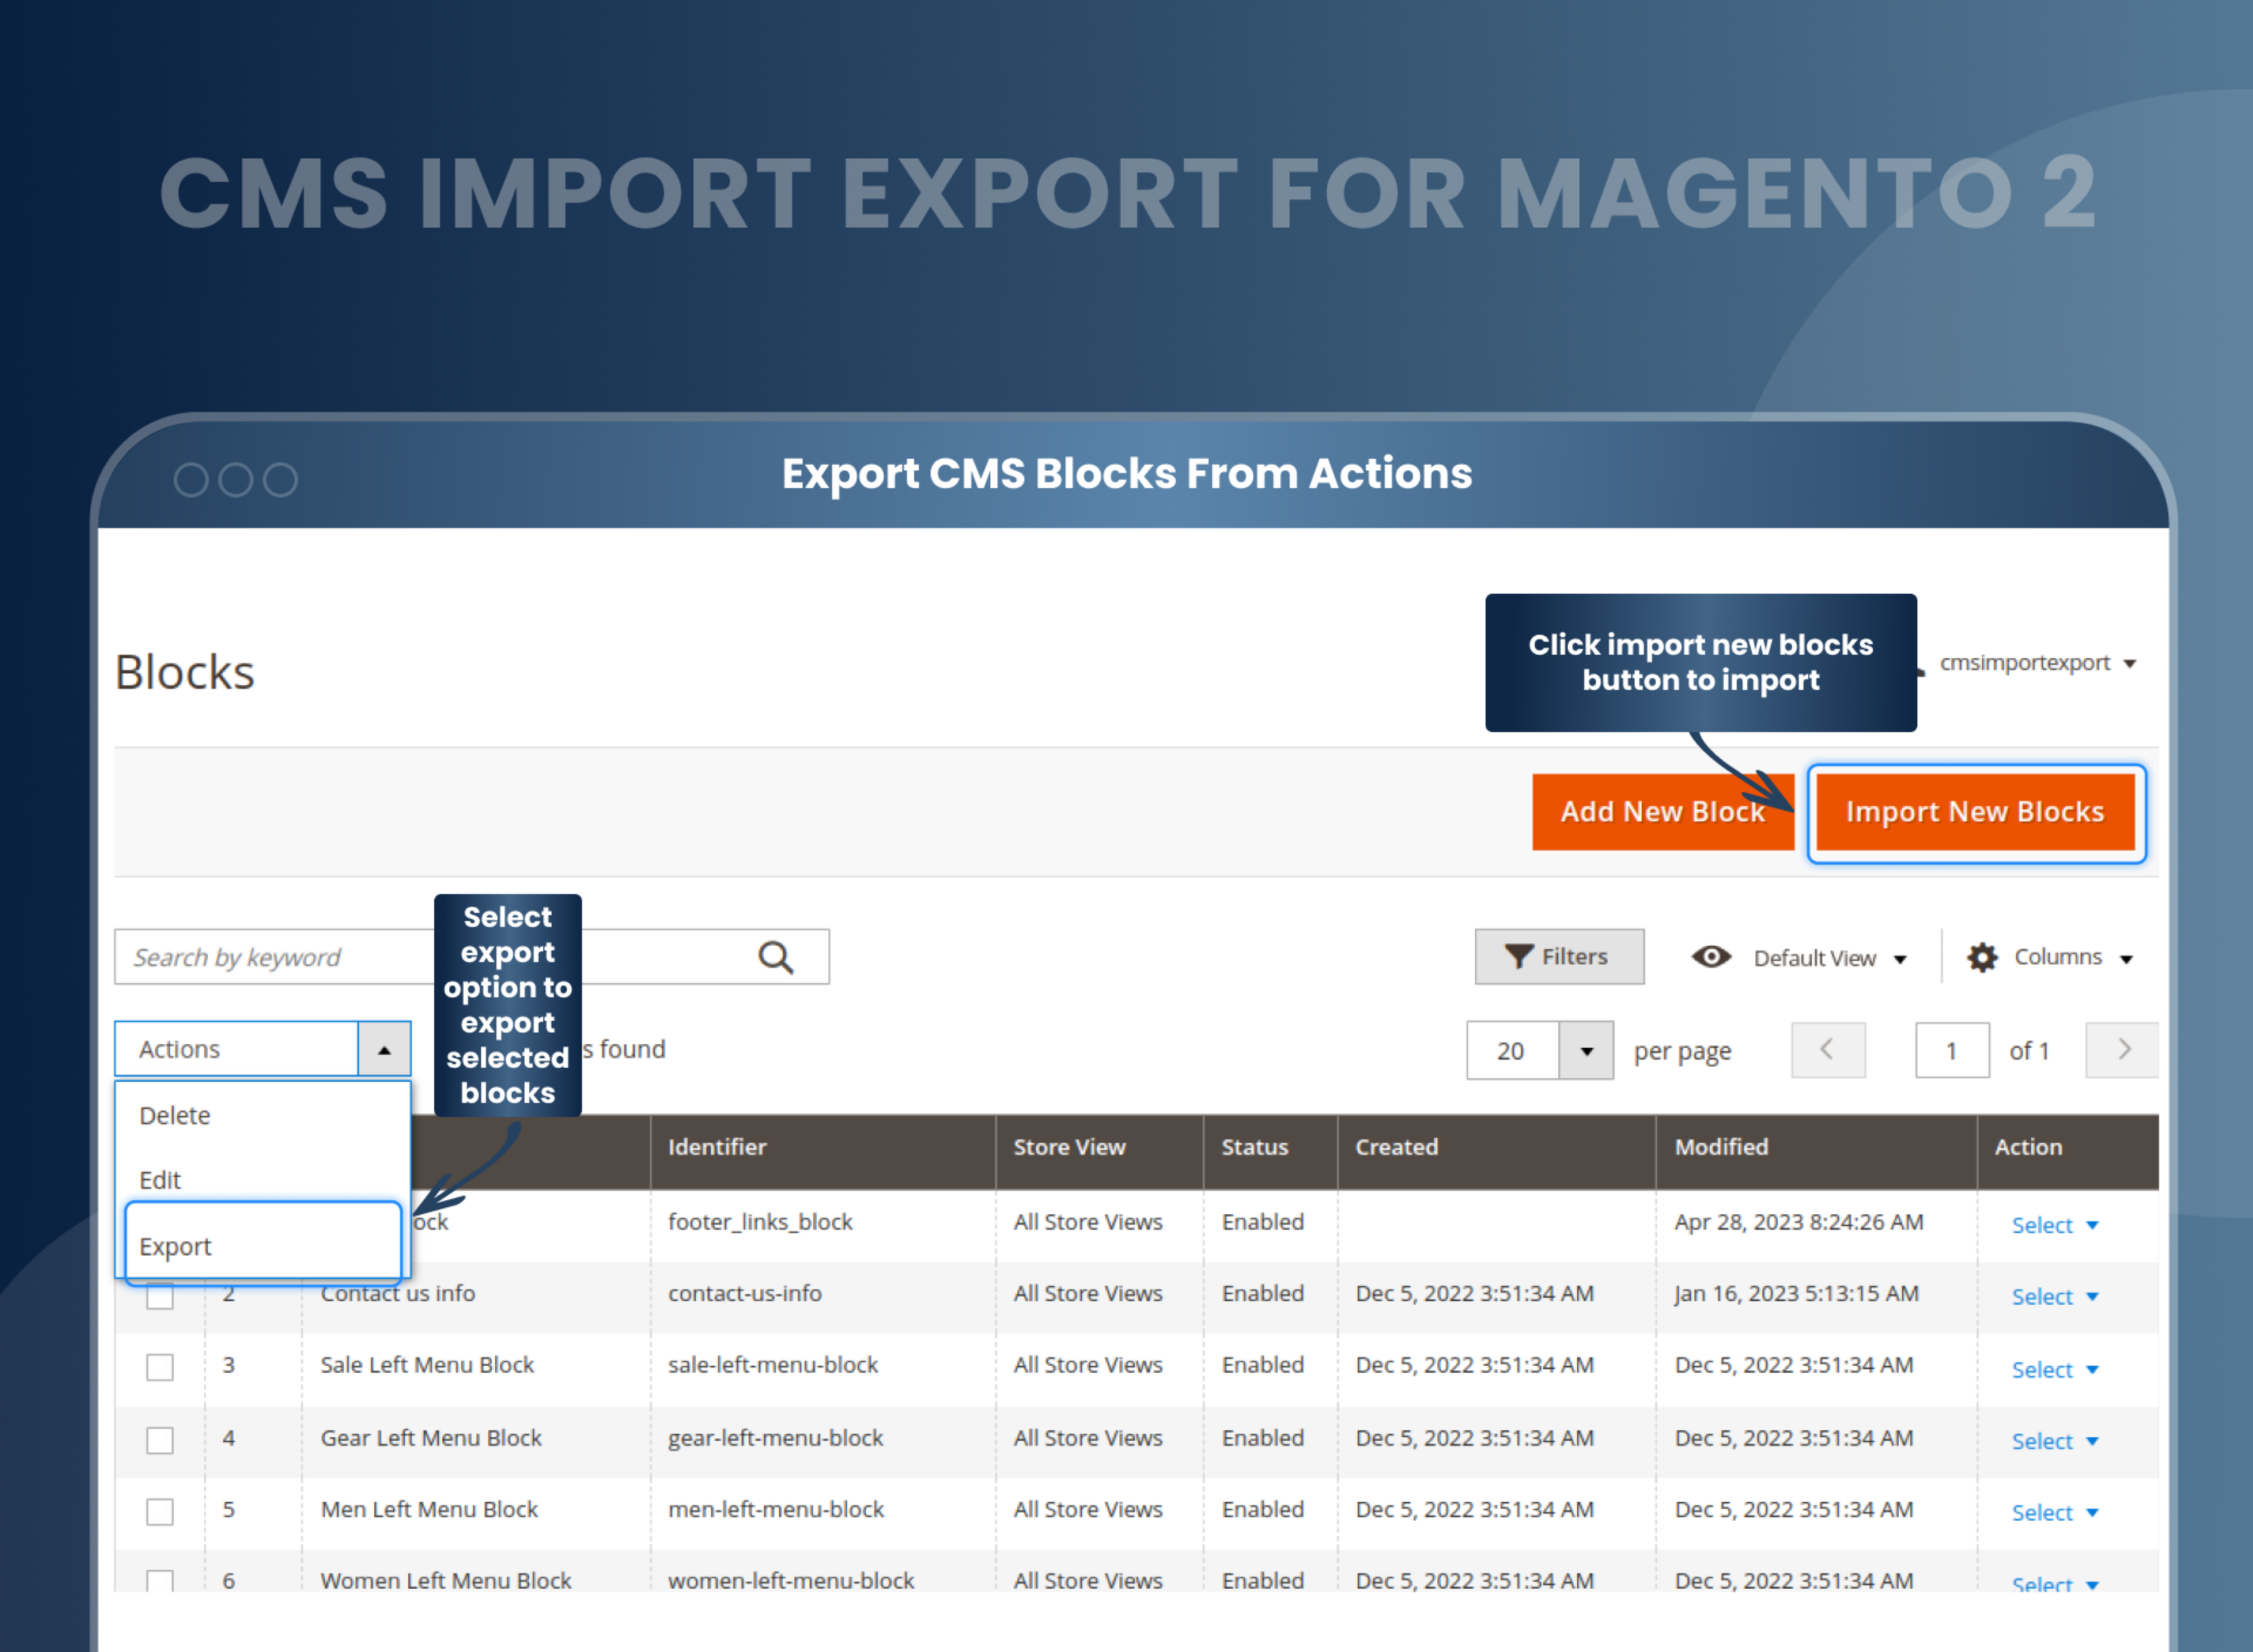 Export CMS Blocks From Actions